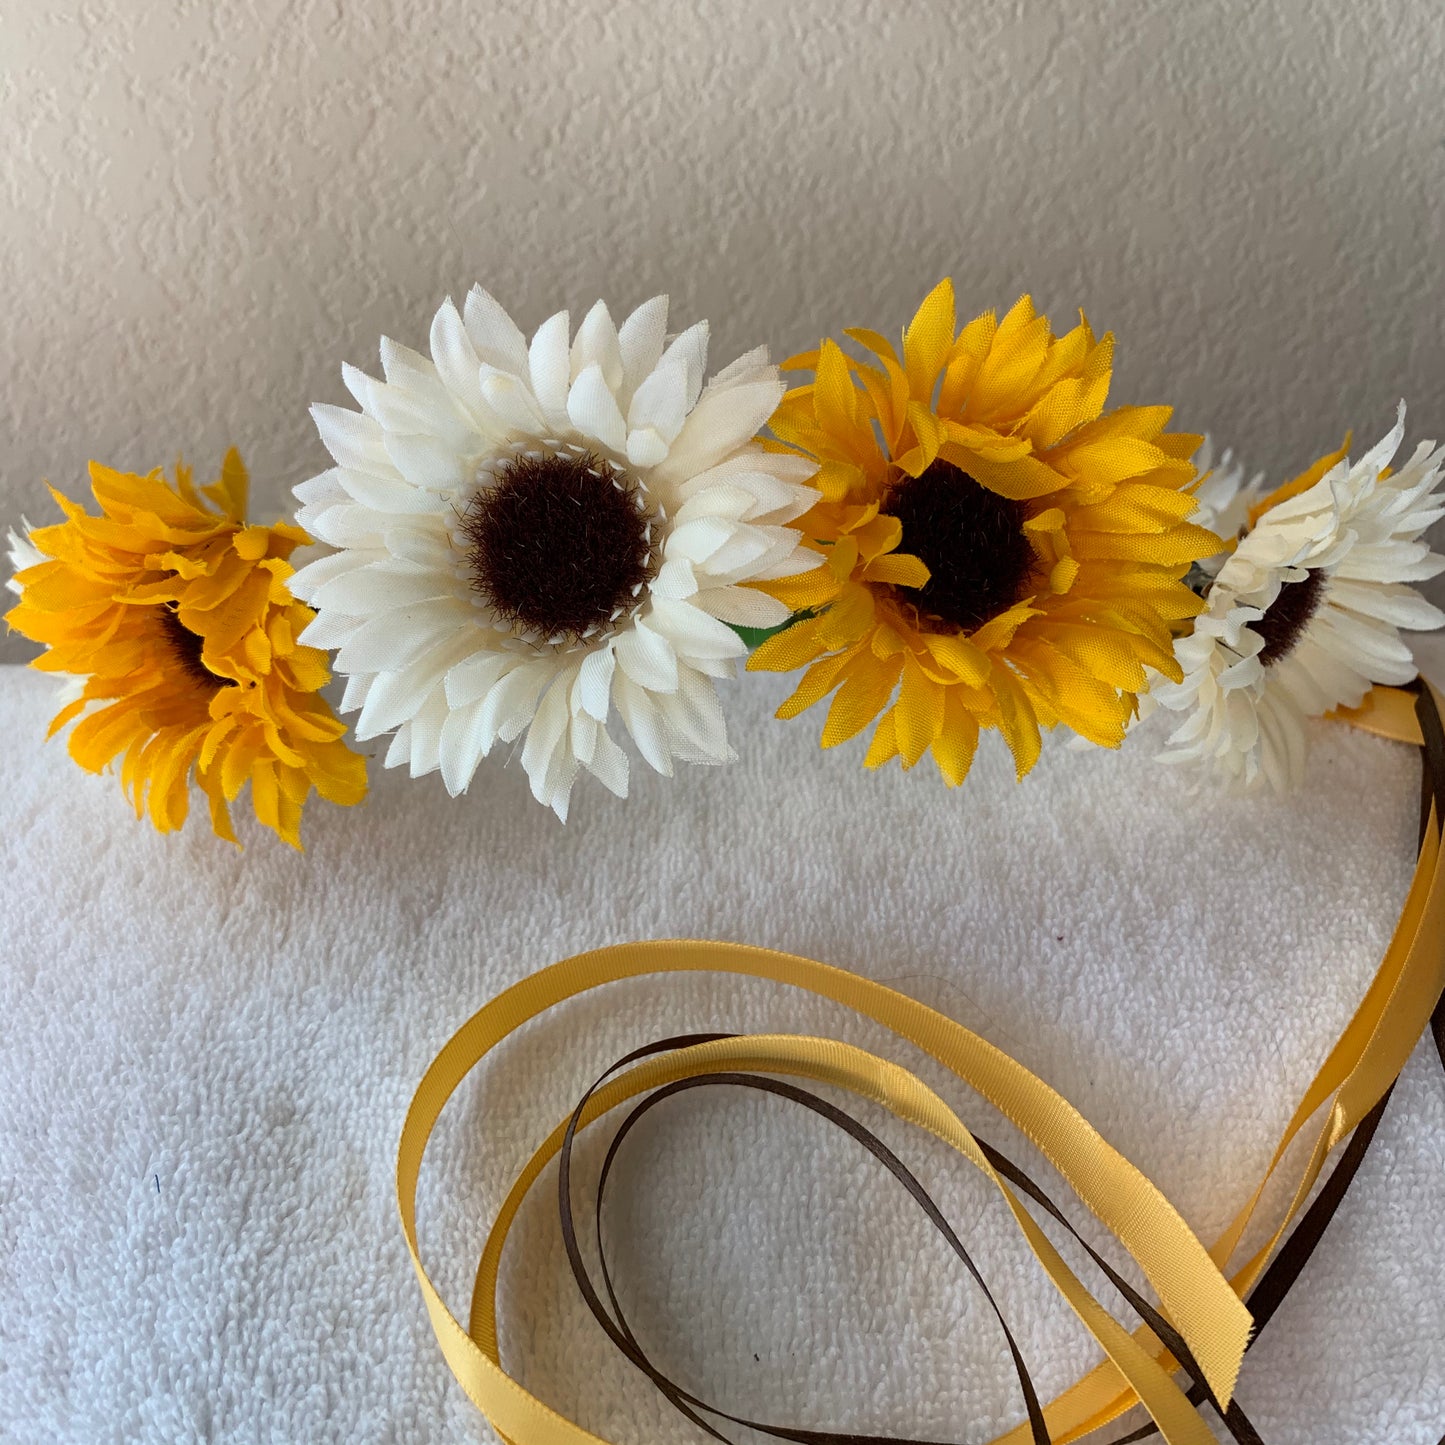 Medium Wreath Lighted - Yellow and Off White Fluffy Daisies